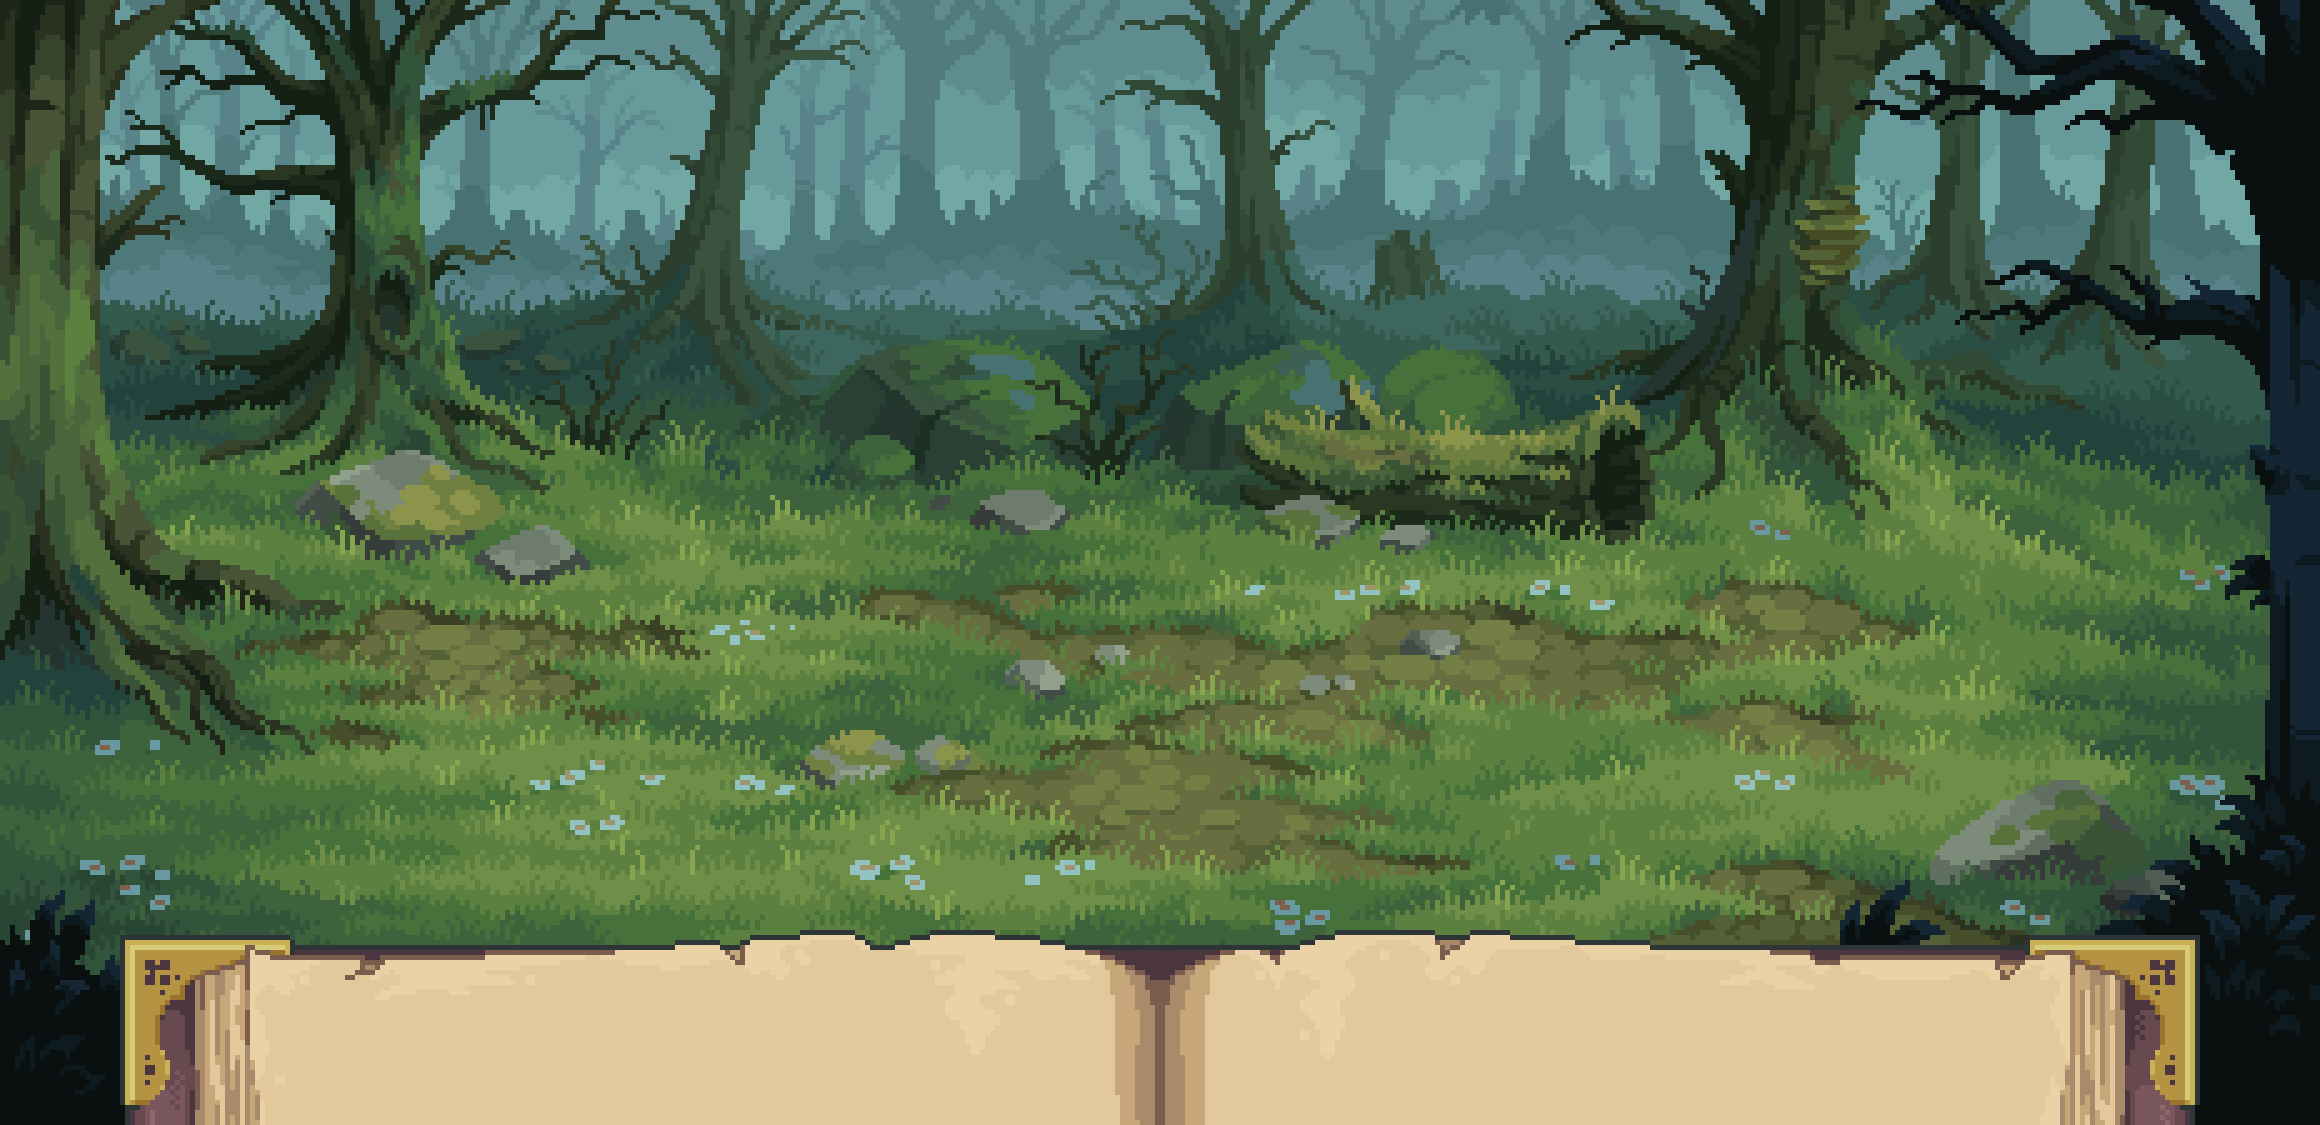 Battle BG for 'Book of Abominations'